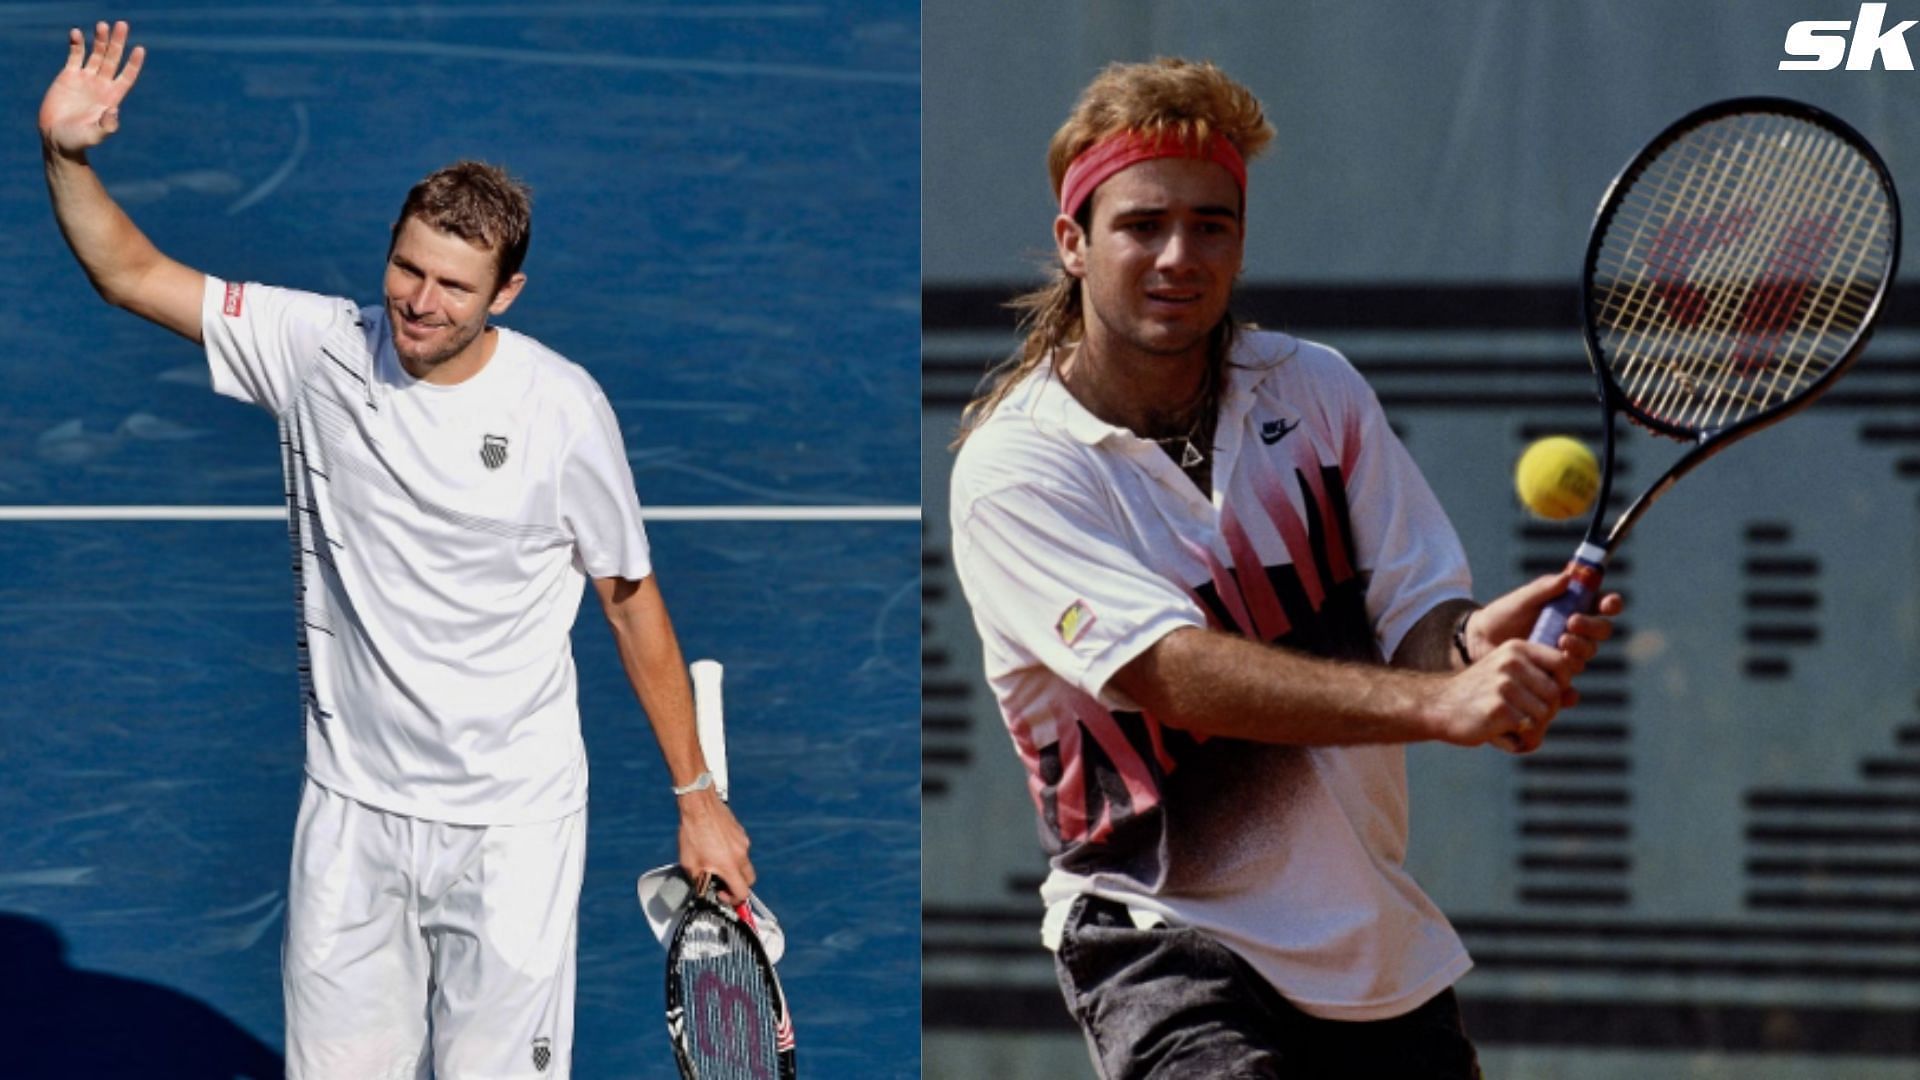 Retired American tennis pros Mardy Fish and Andre Agassi during their playing days